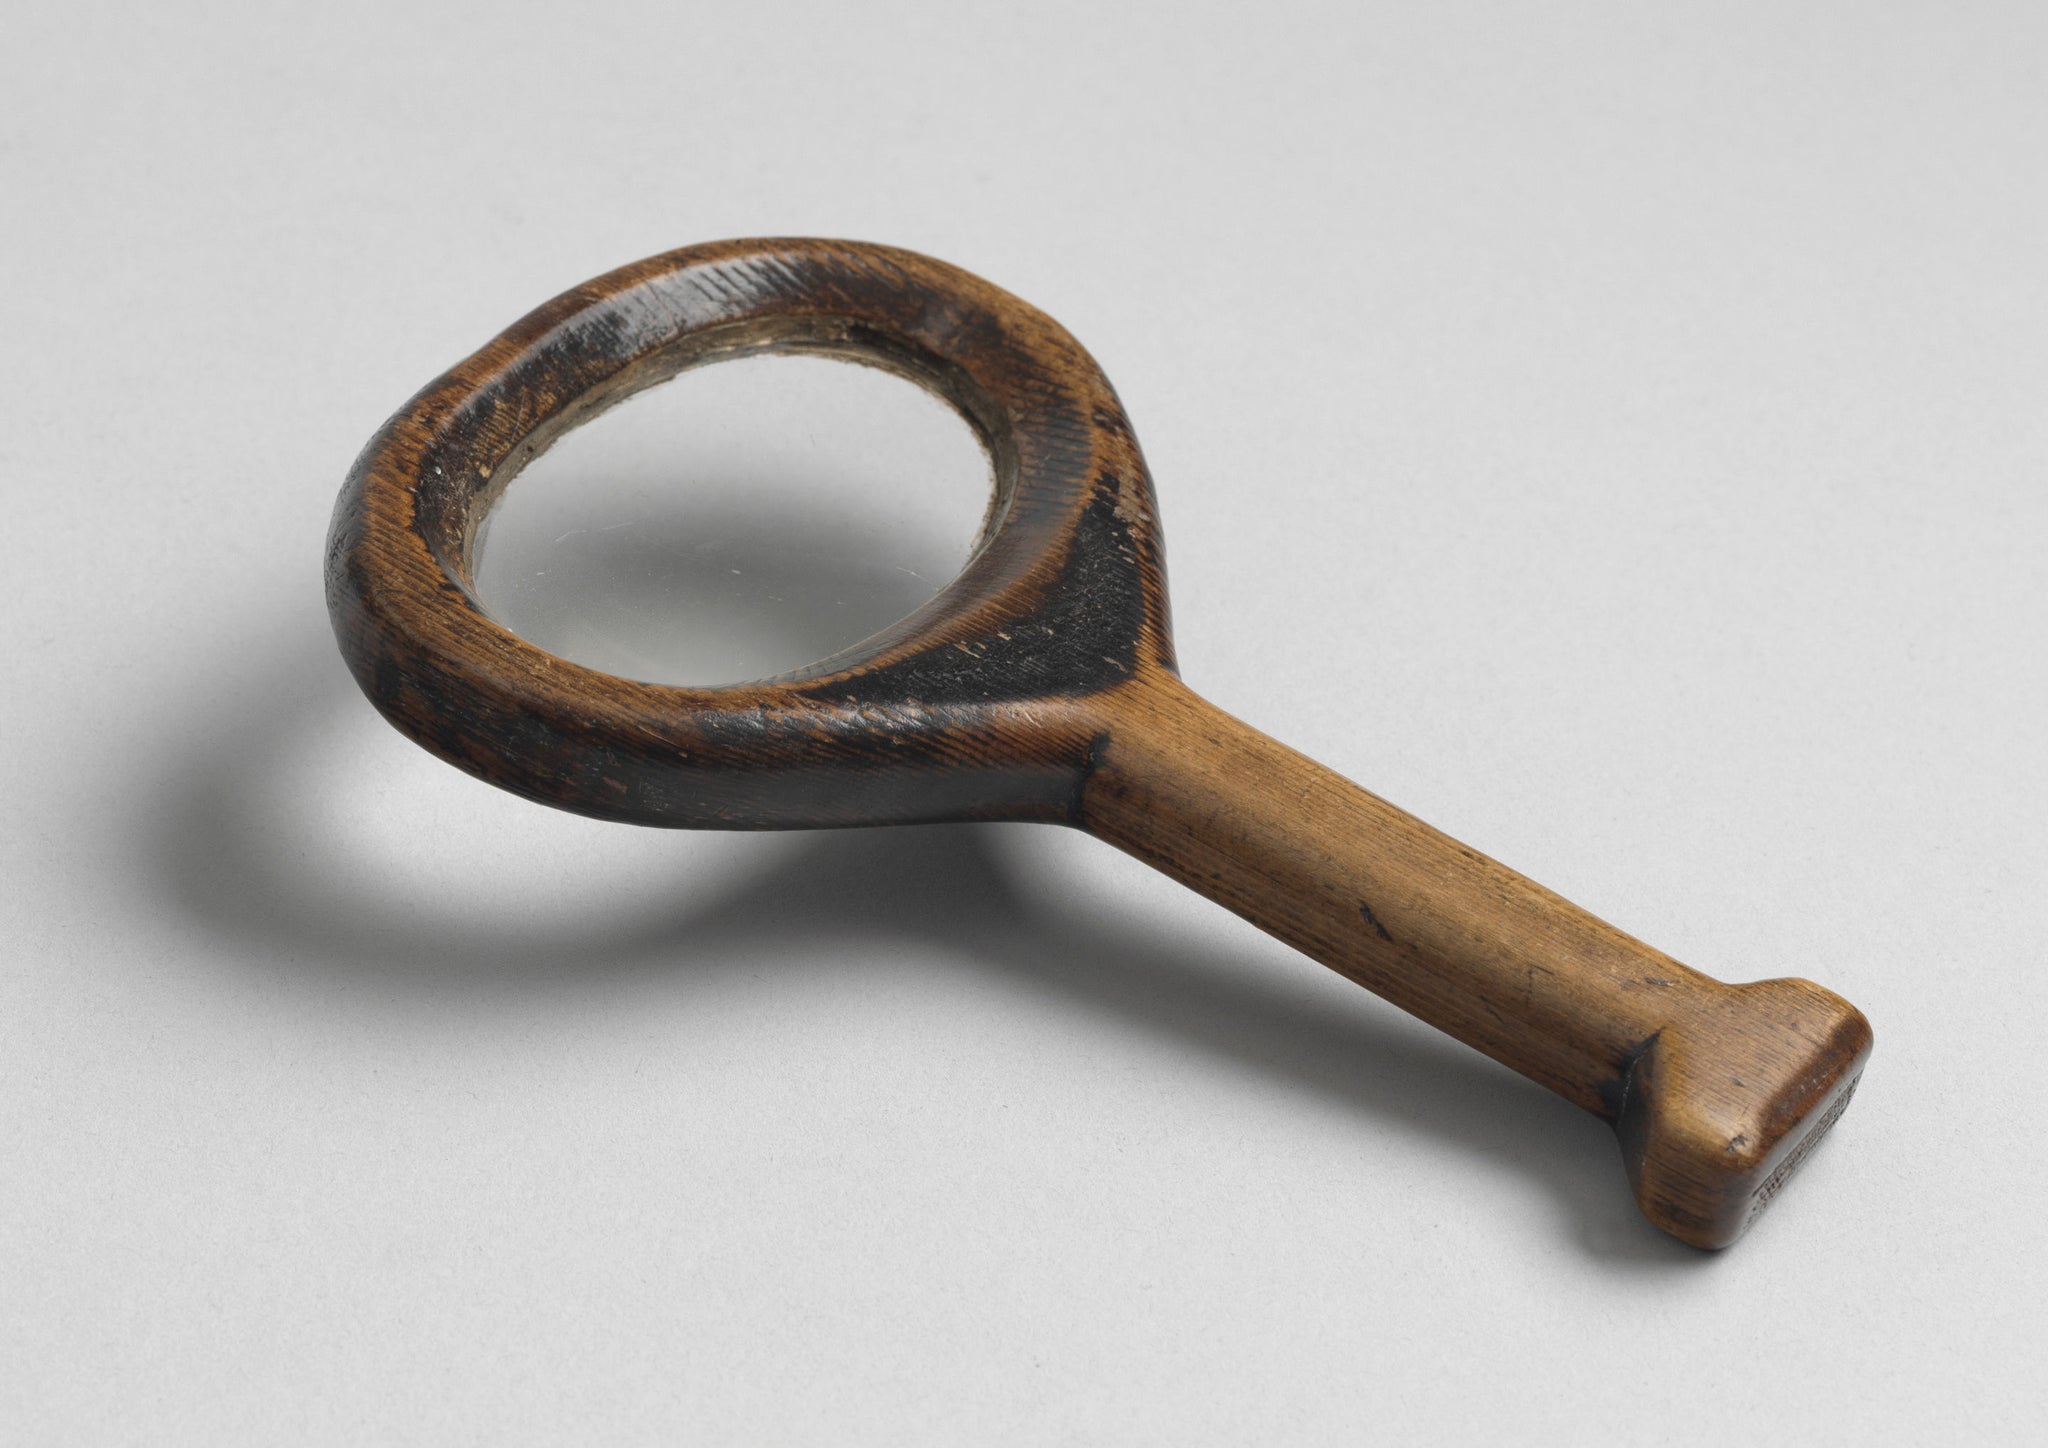 Early Magnifying Glass.